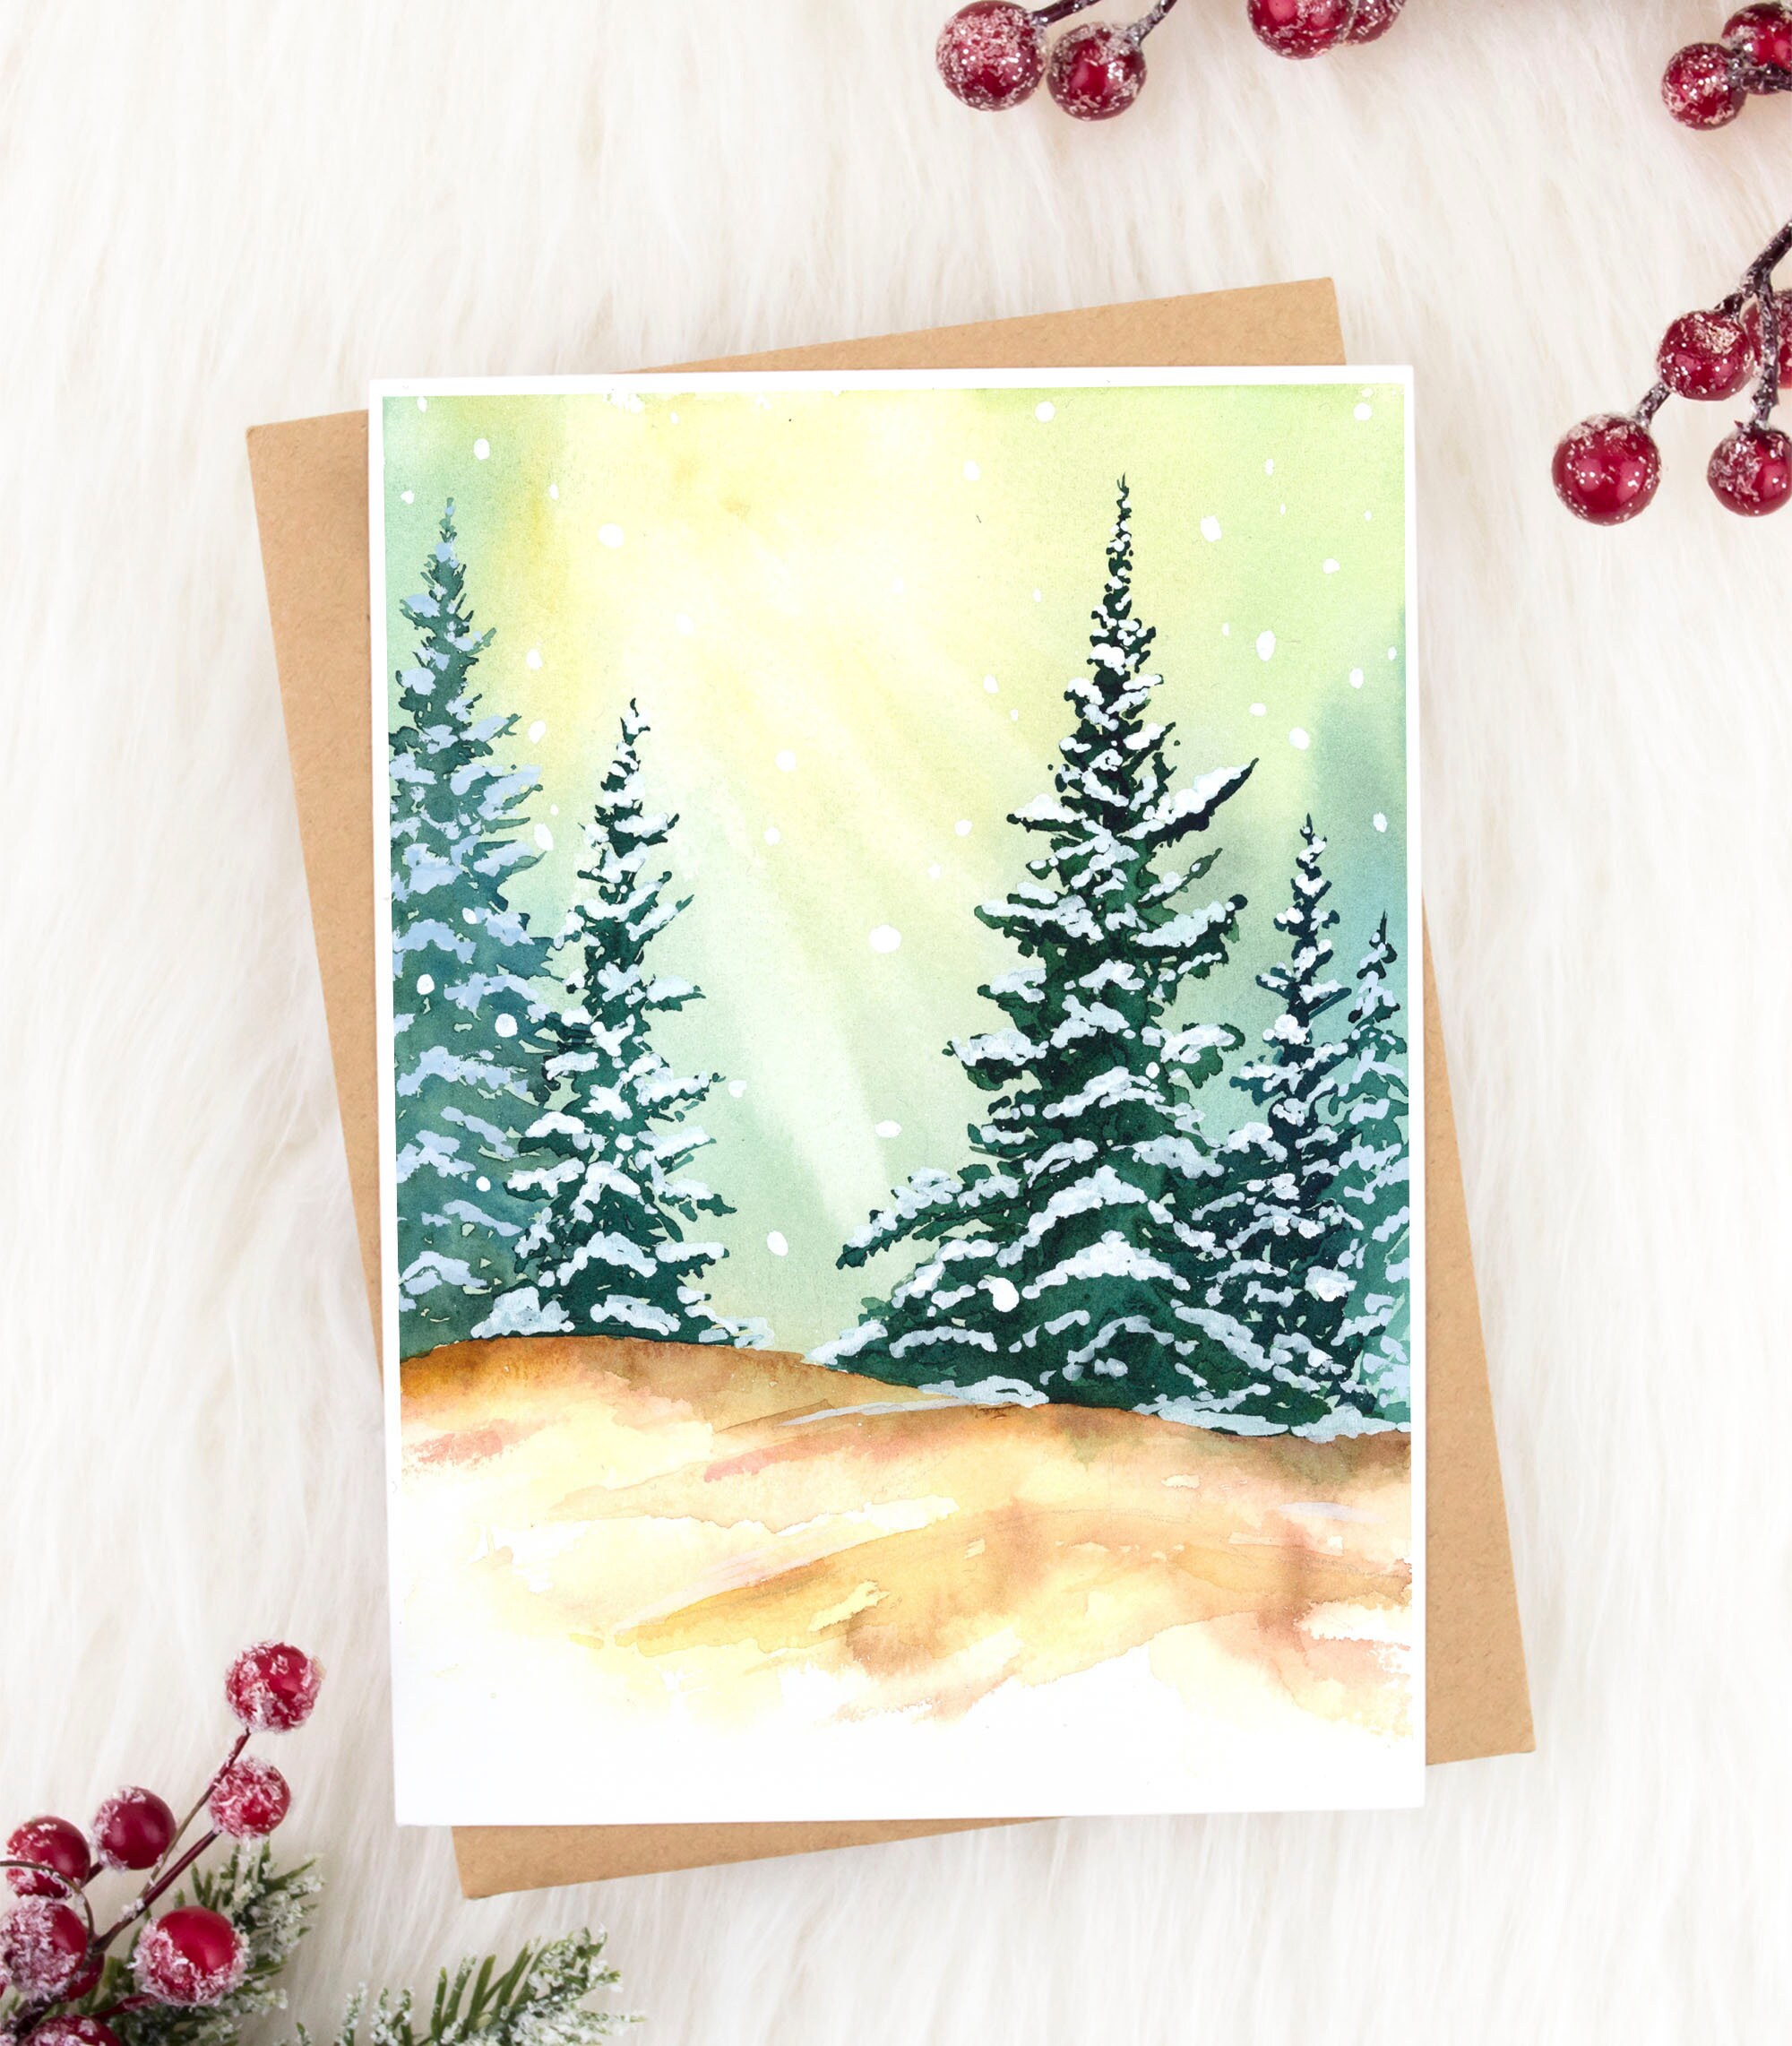 Pine Christmas Tree Greeting Card - The Painted Pen Artwork by